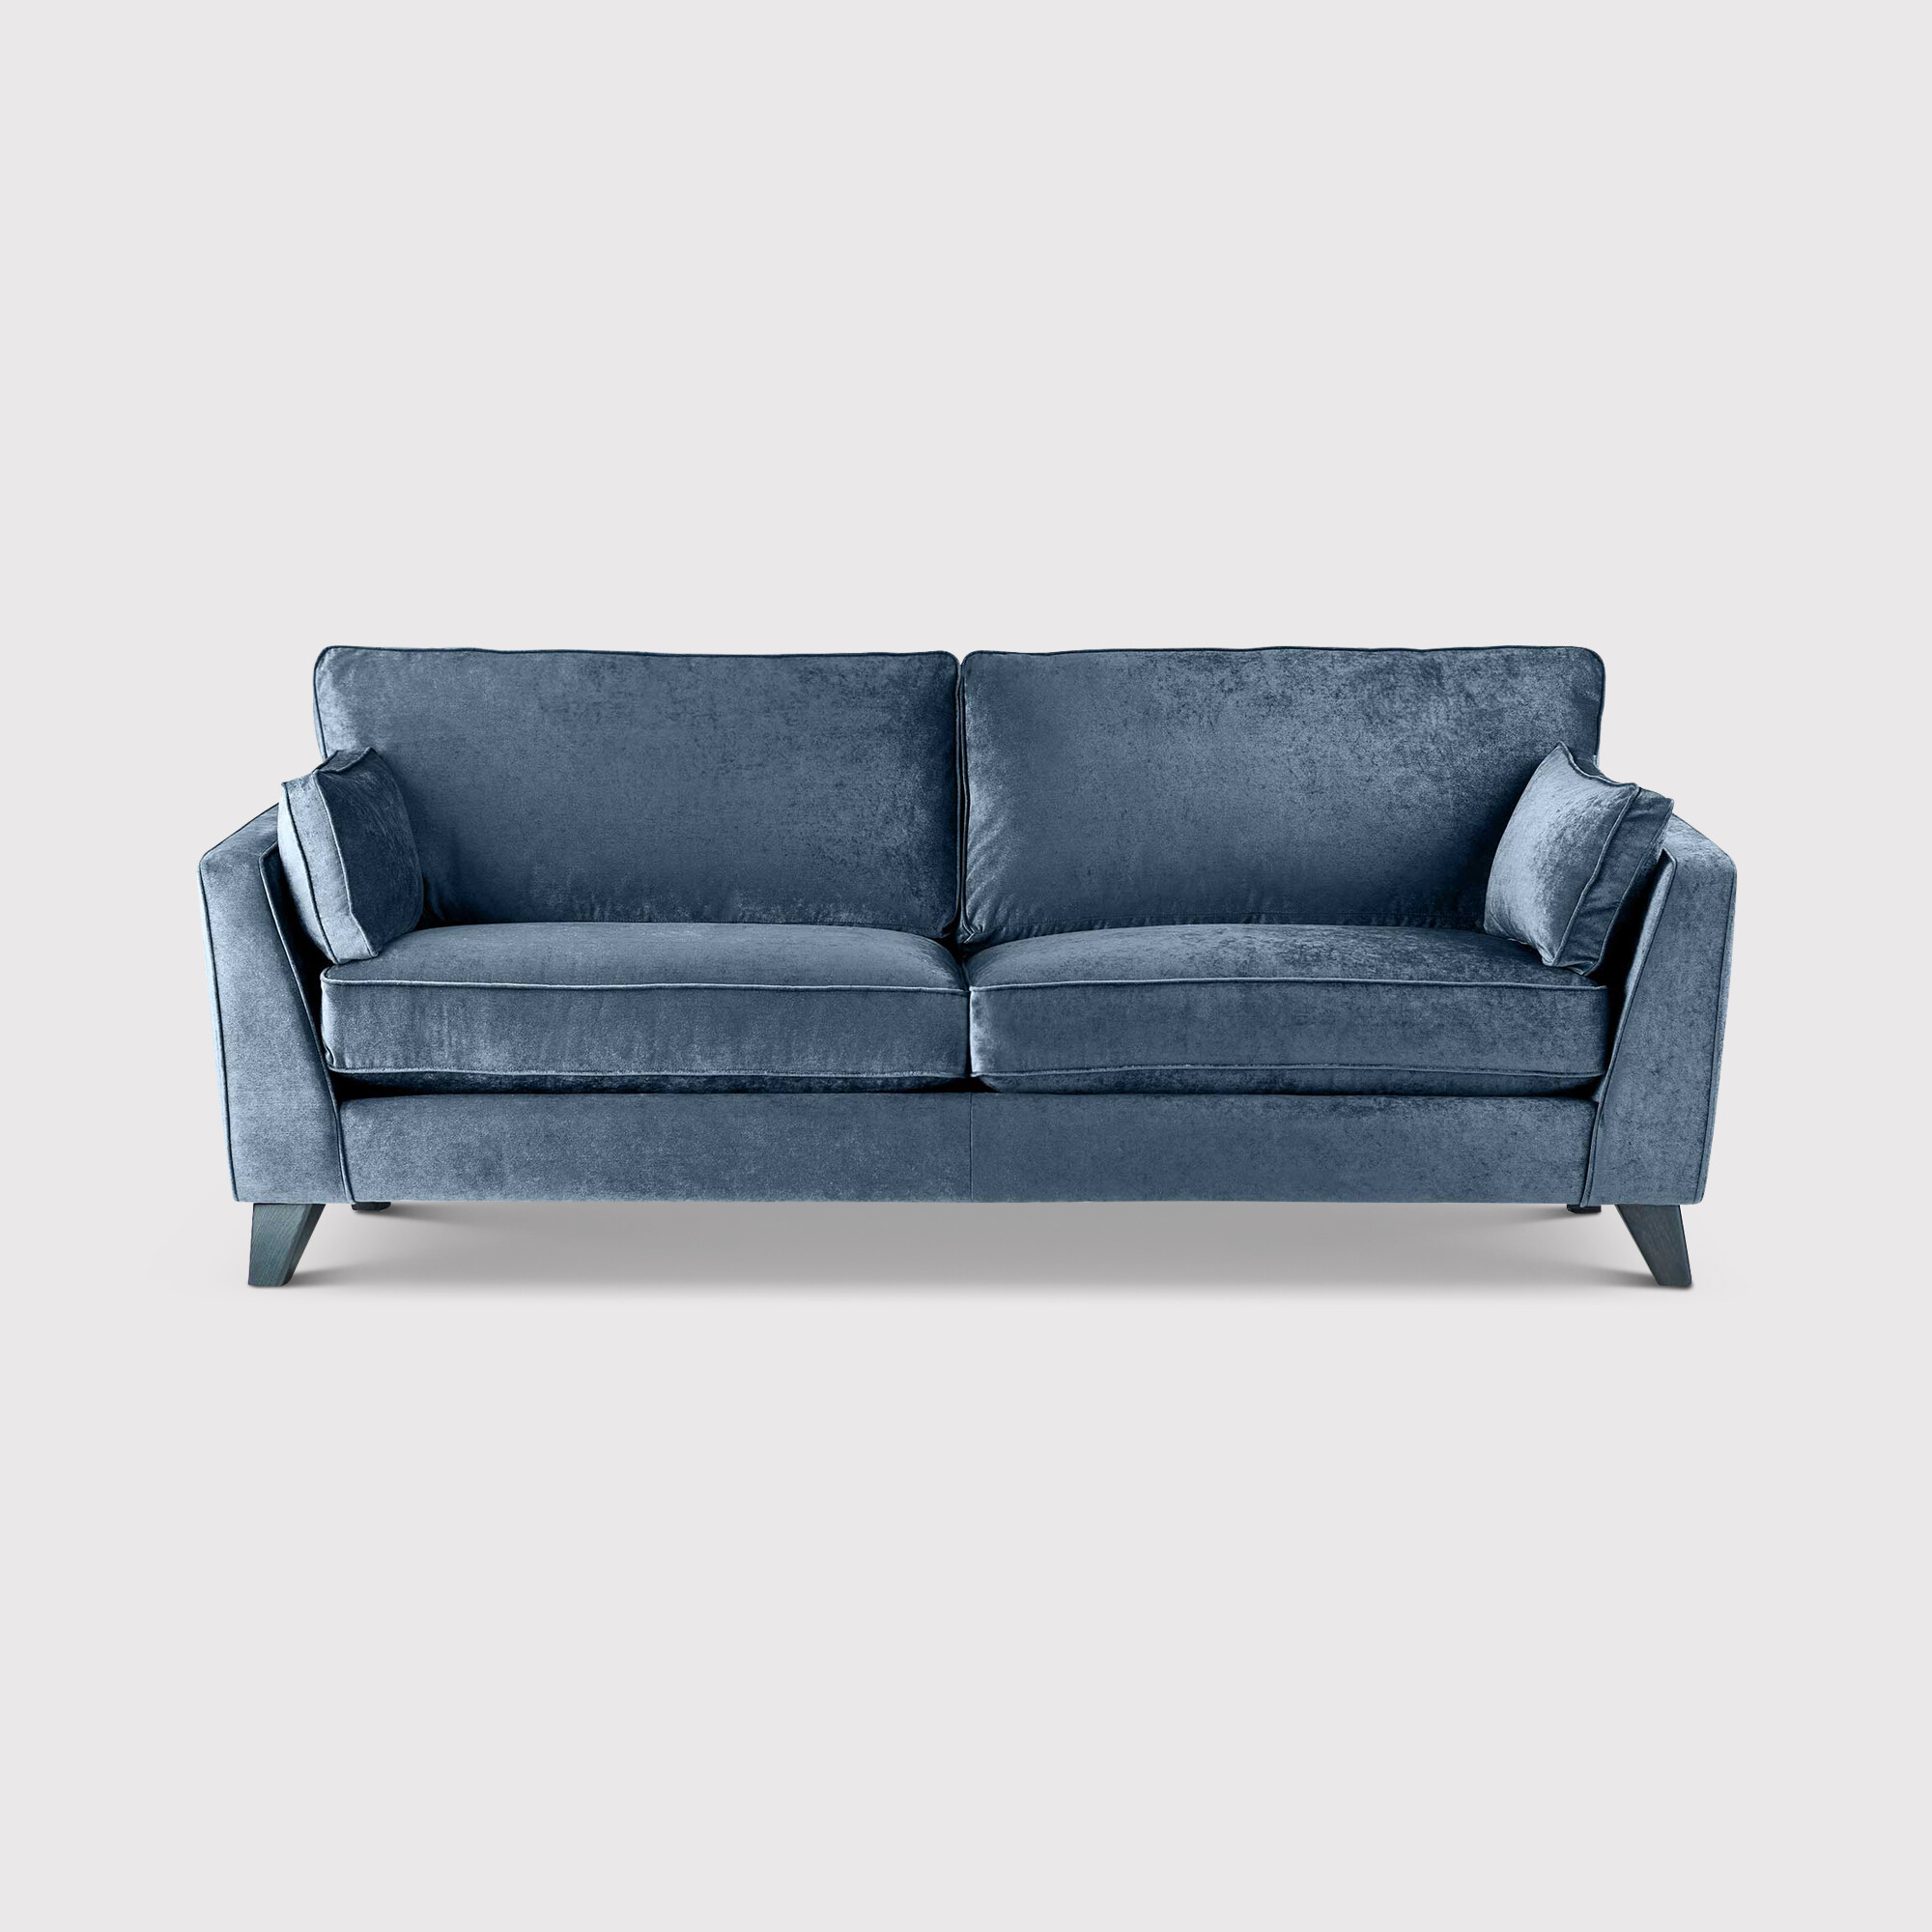 Rene 3 Seater Sofa Without Scatters, Blue Fabric | Barker & Stonehouse